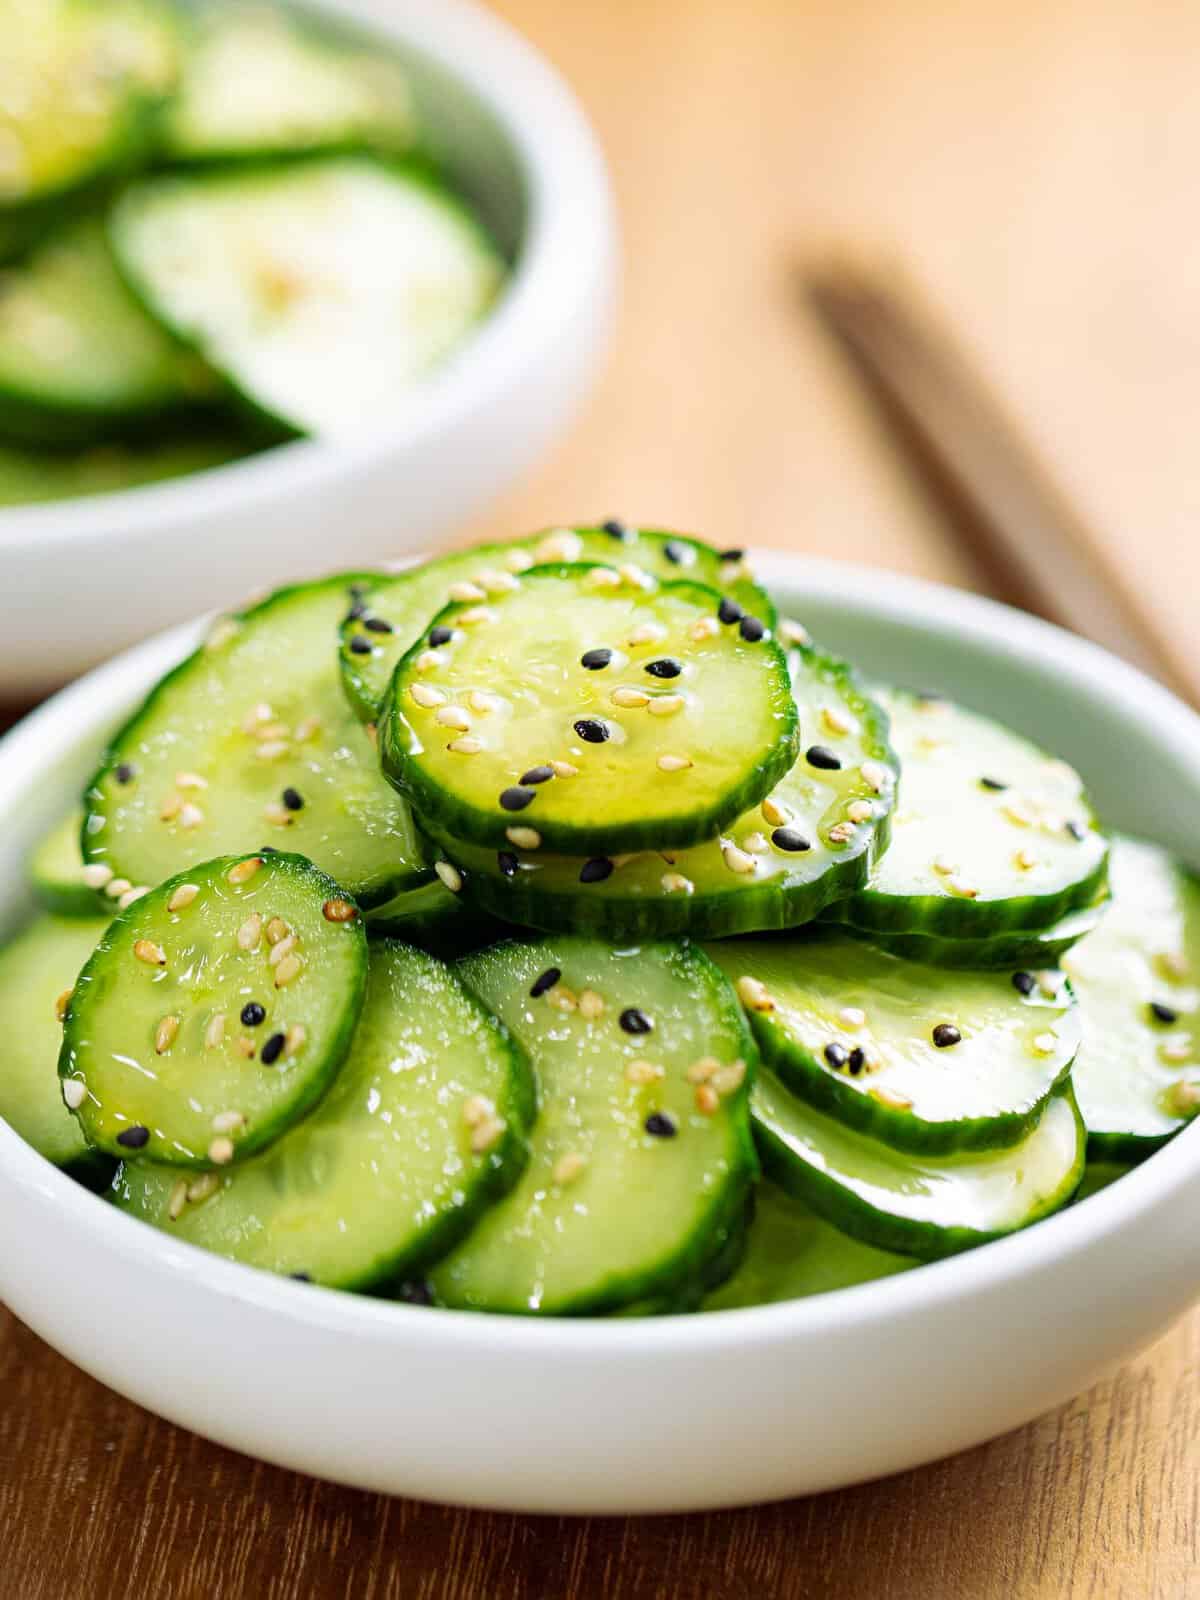 Sunomono or Japanese cucumber salad with sesame seeds in a white bowl.